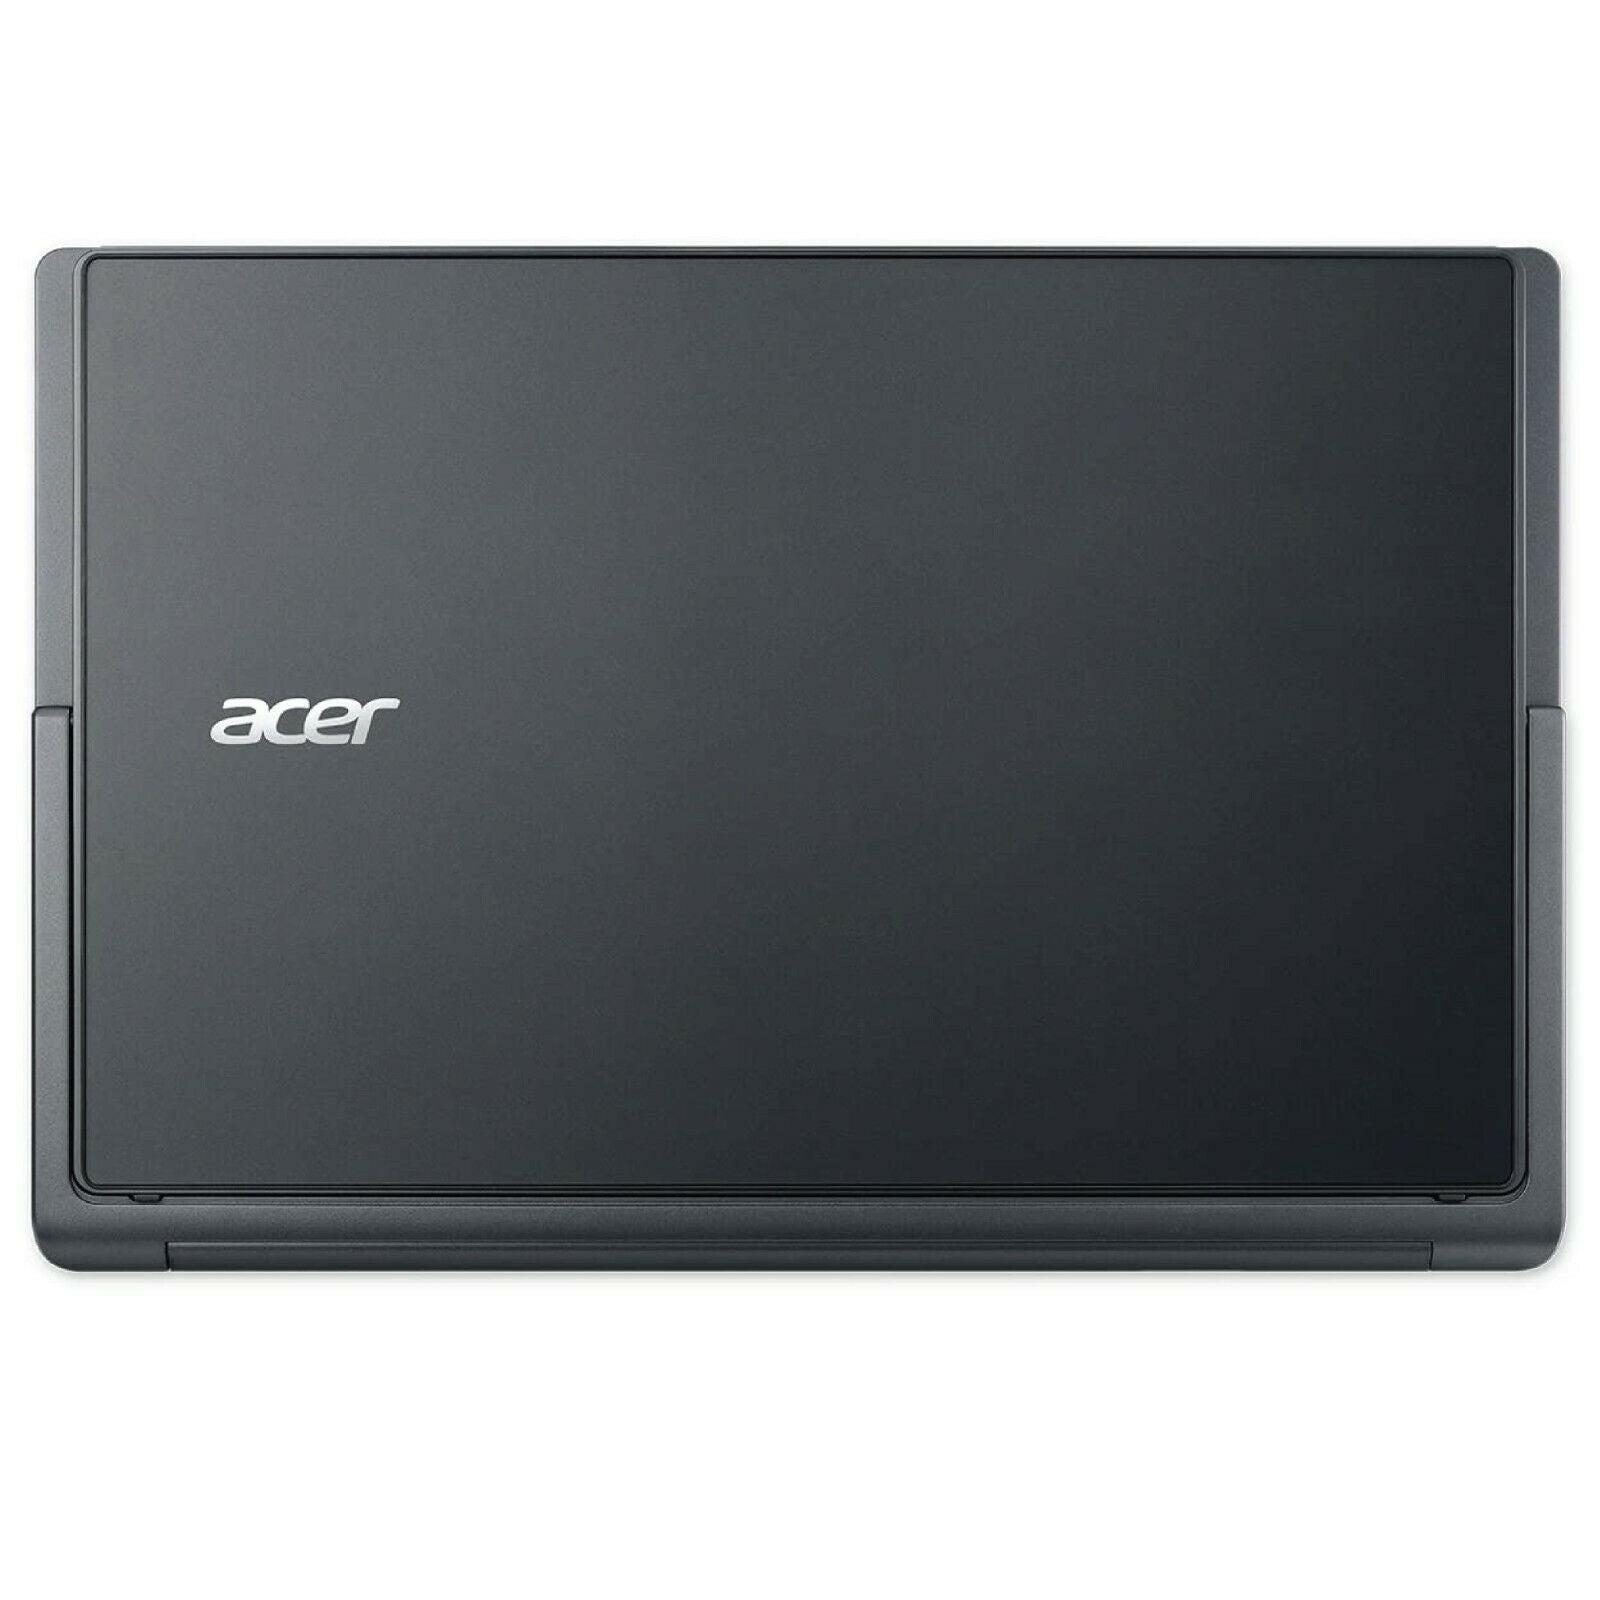 Acer Aspire 13.3in Touchscreen Laptop/Tablet Core i5-4210 1.7GHz 8GB RAM 450GB